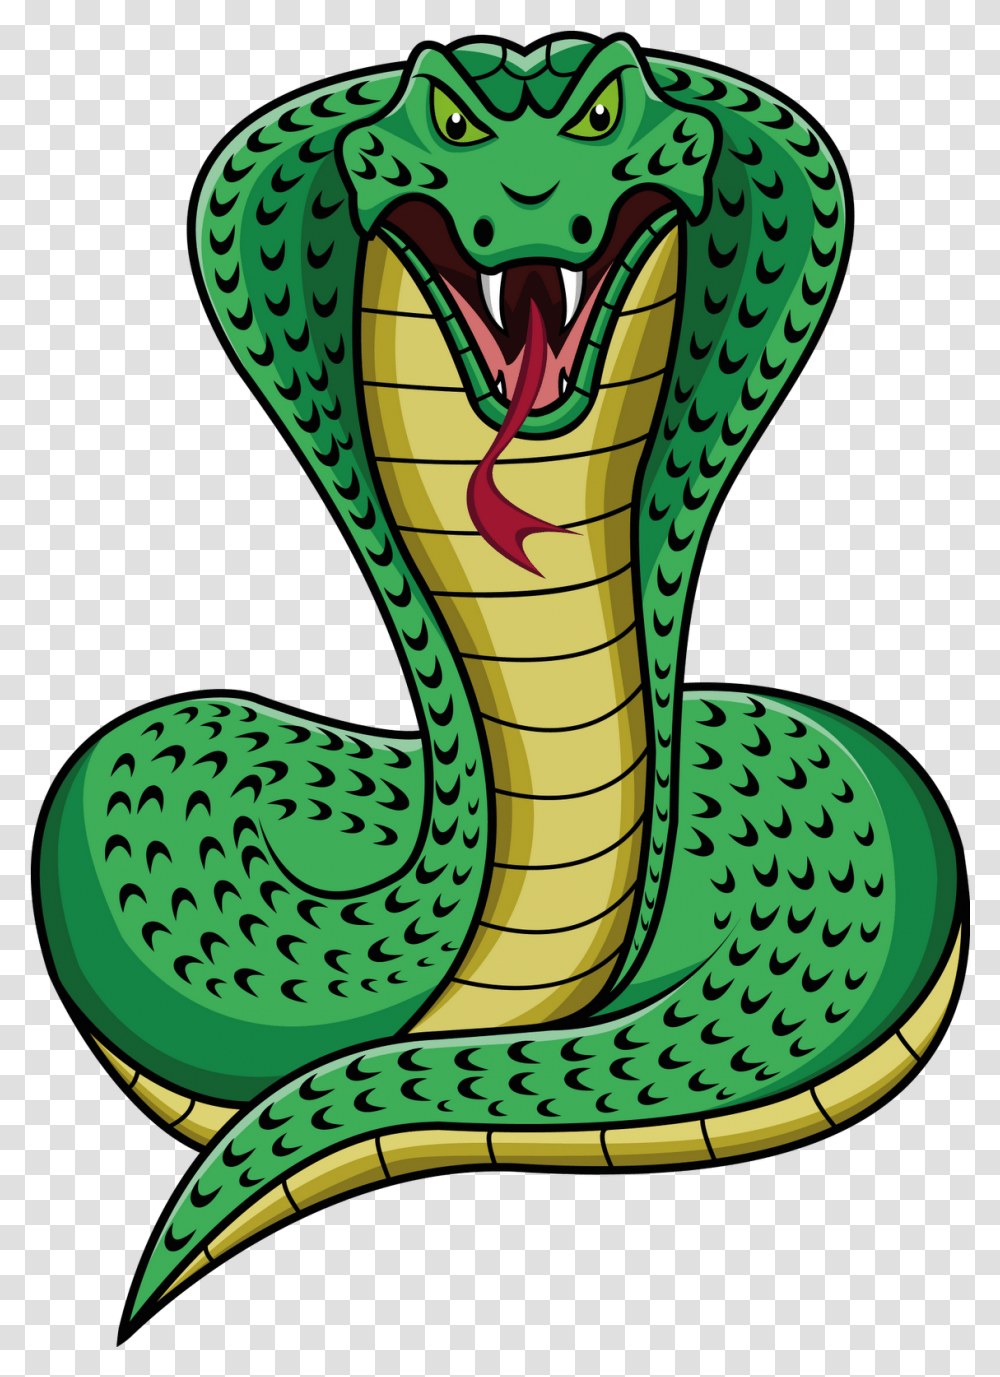 Library Of Serpent Apple Clip Art Freeuse Files Gucci Snake, Reptile, Animal, Cobra Transparent Png